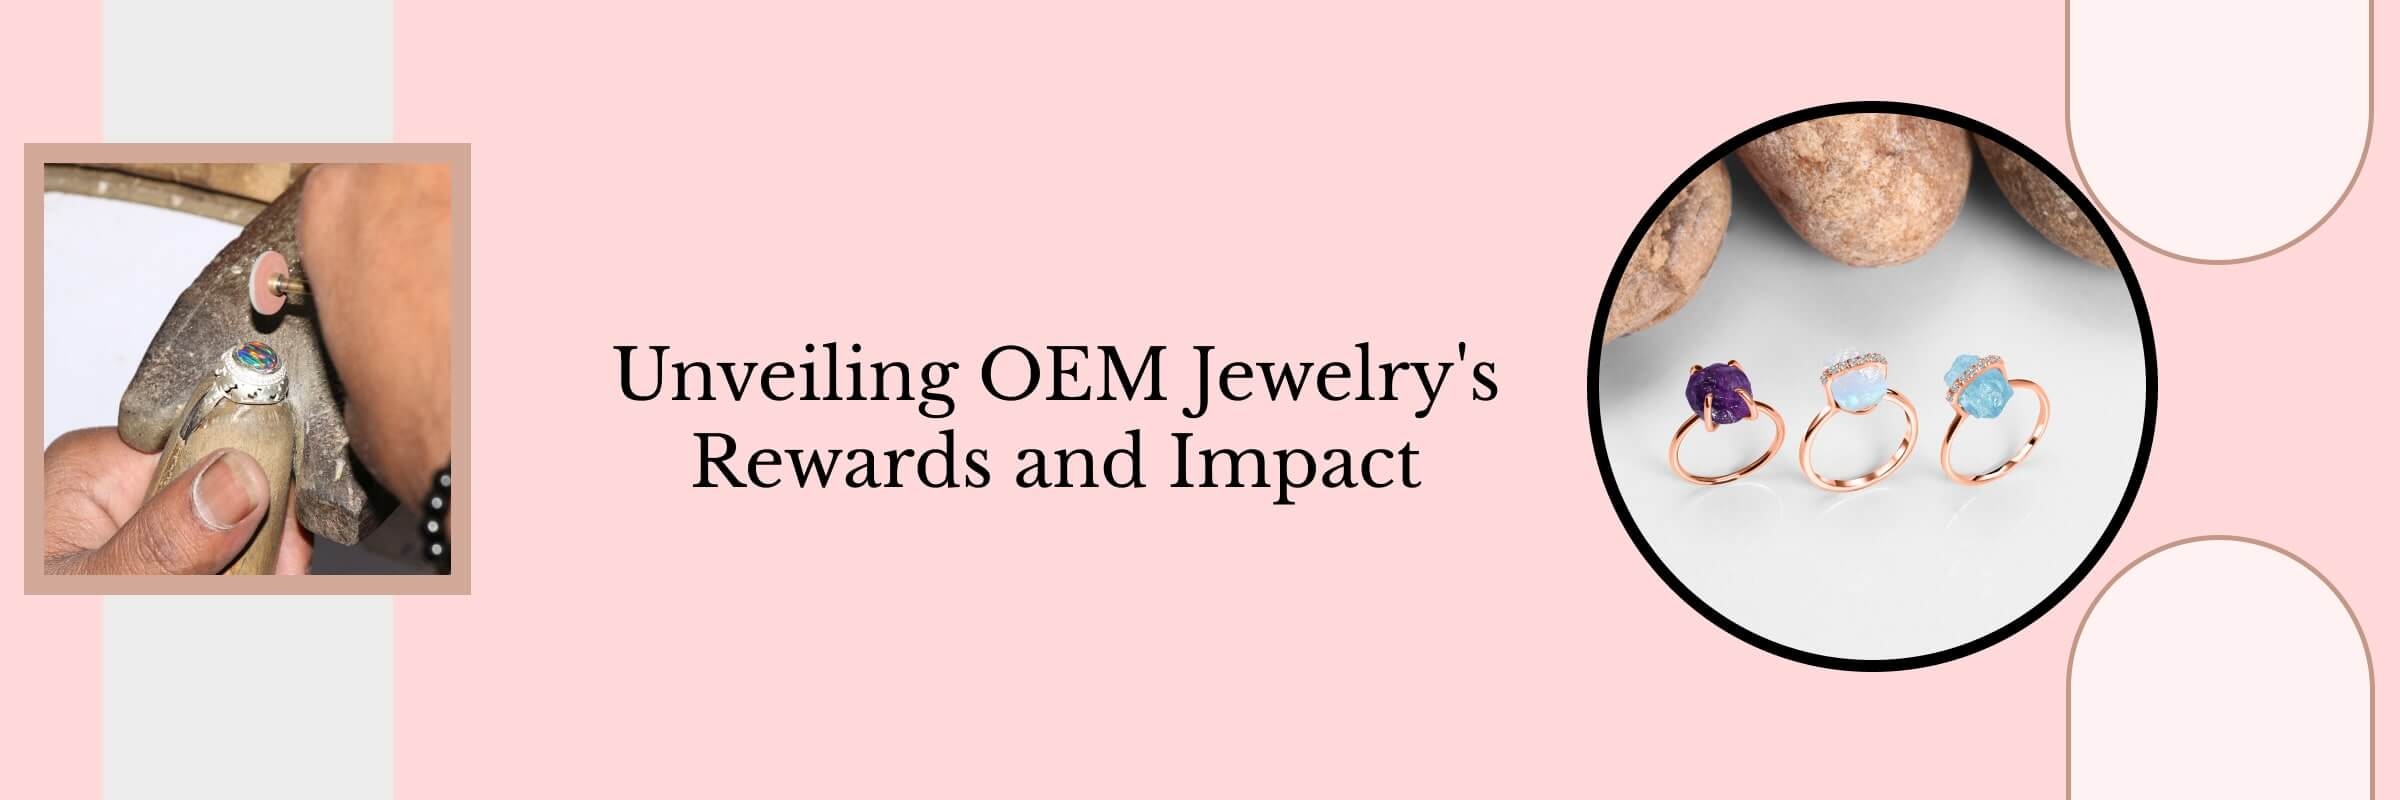 Significance and Benefits of OEM Jewelry Manufacturing